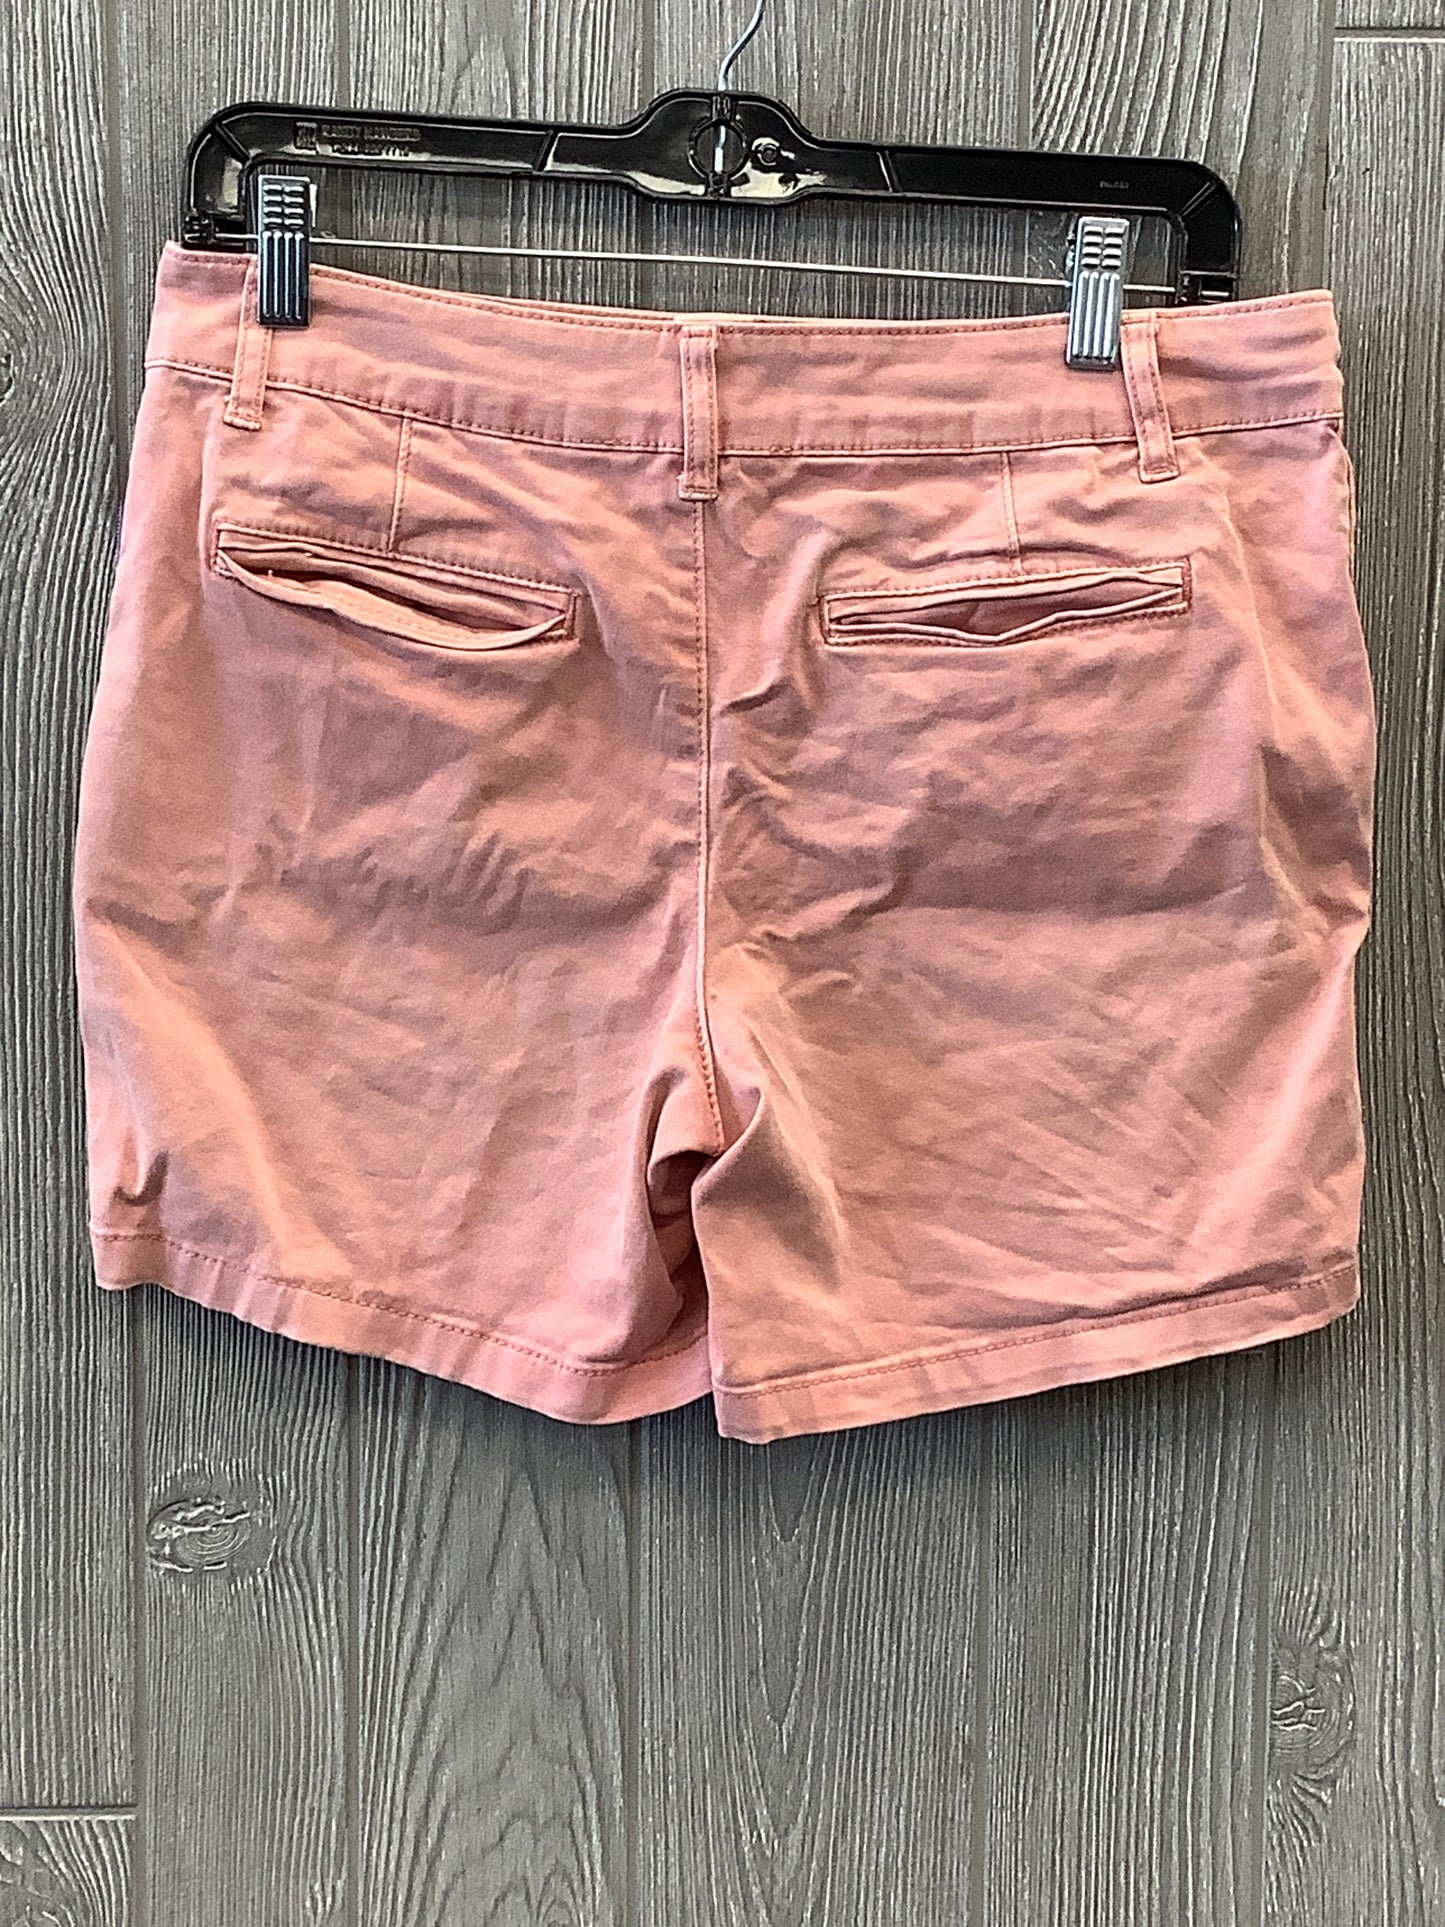 Pink Shorts C And C, Size 4